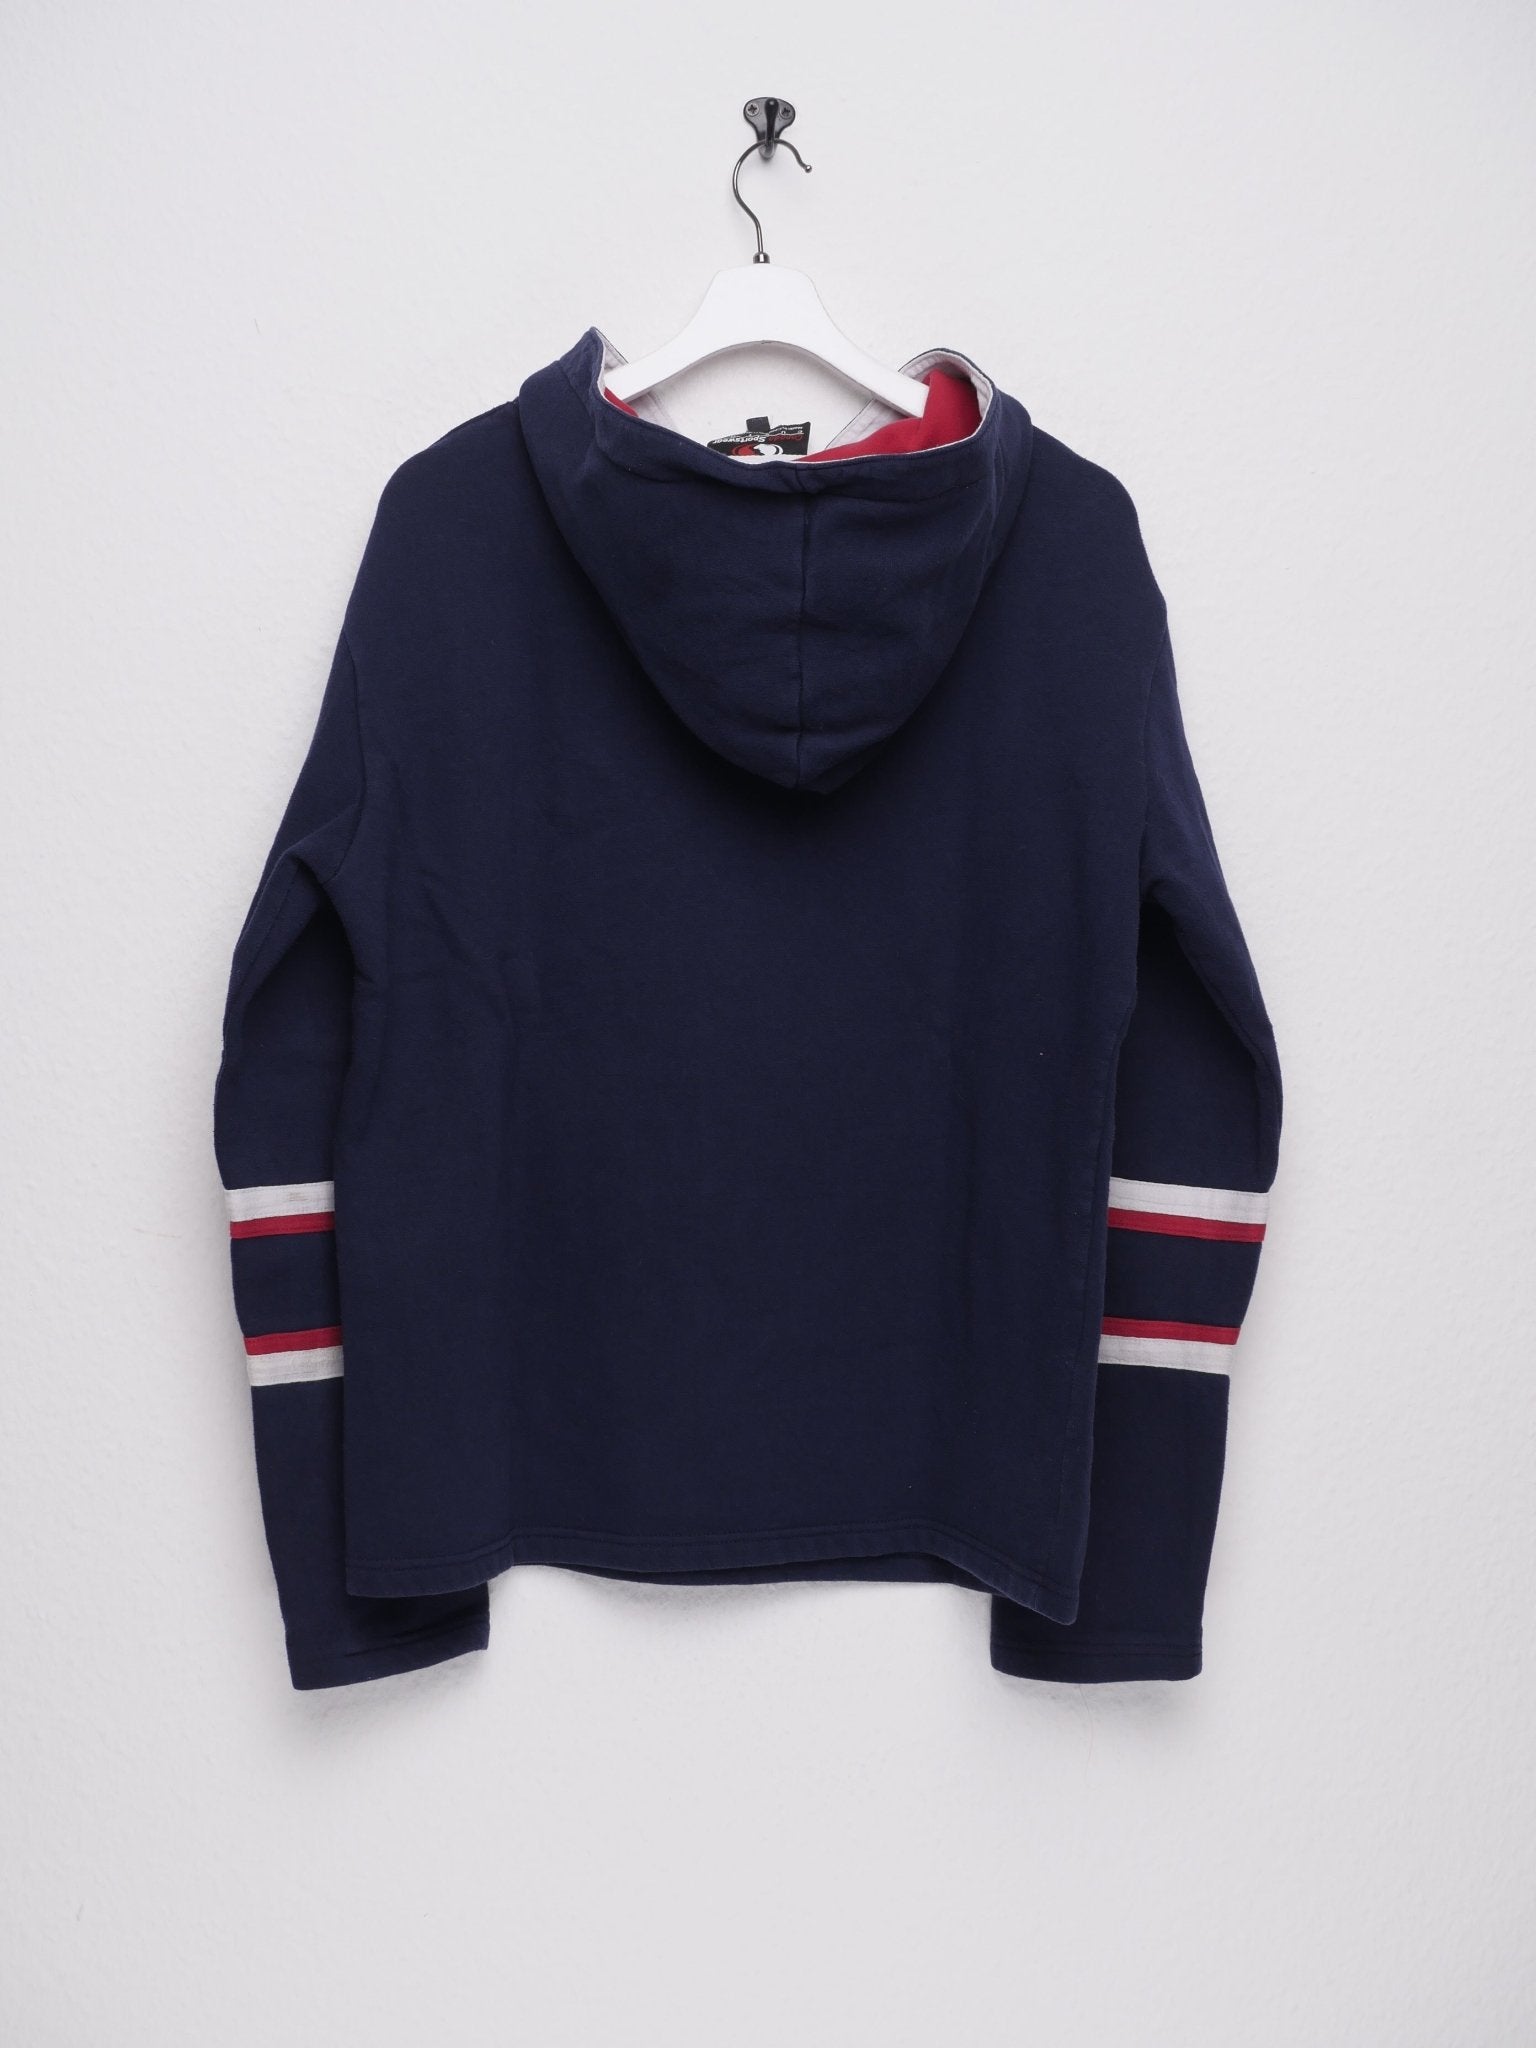 embroidered Hockey Tradition navy Hoodie - Peeces